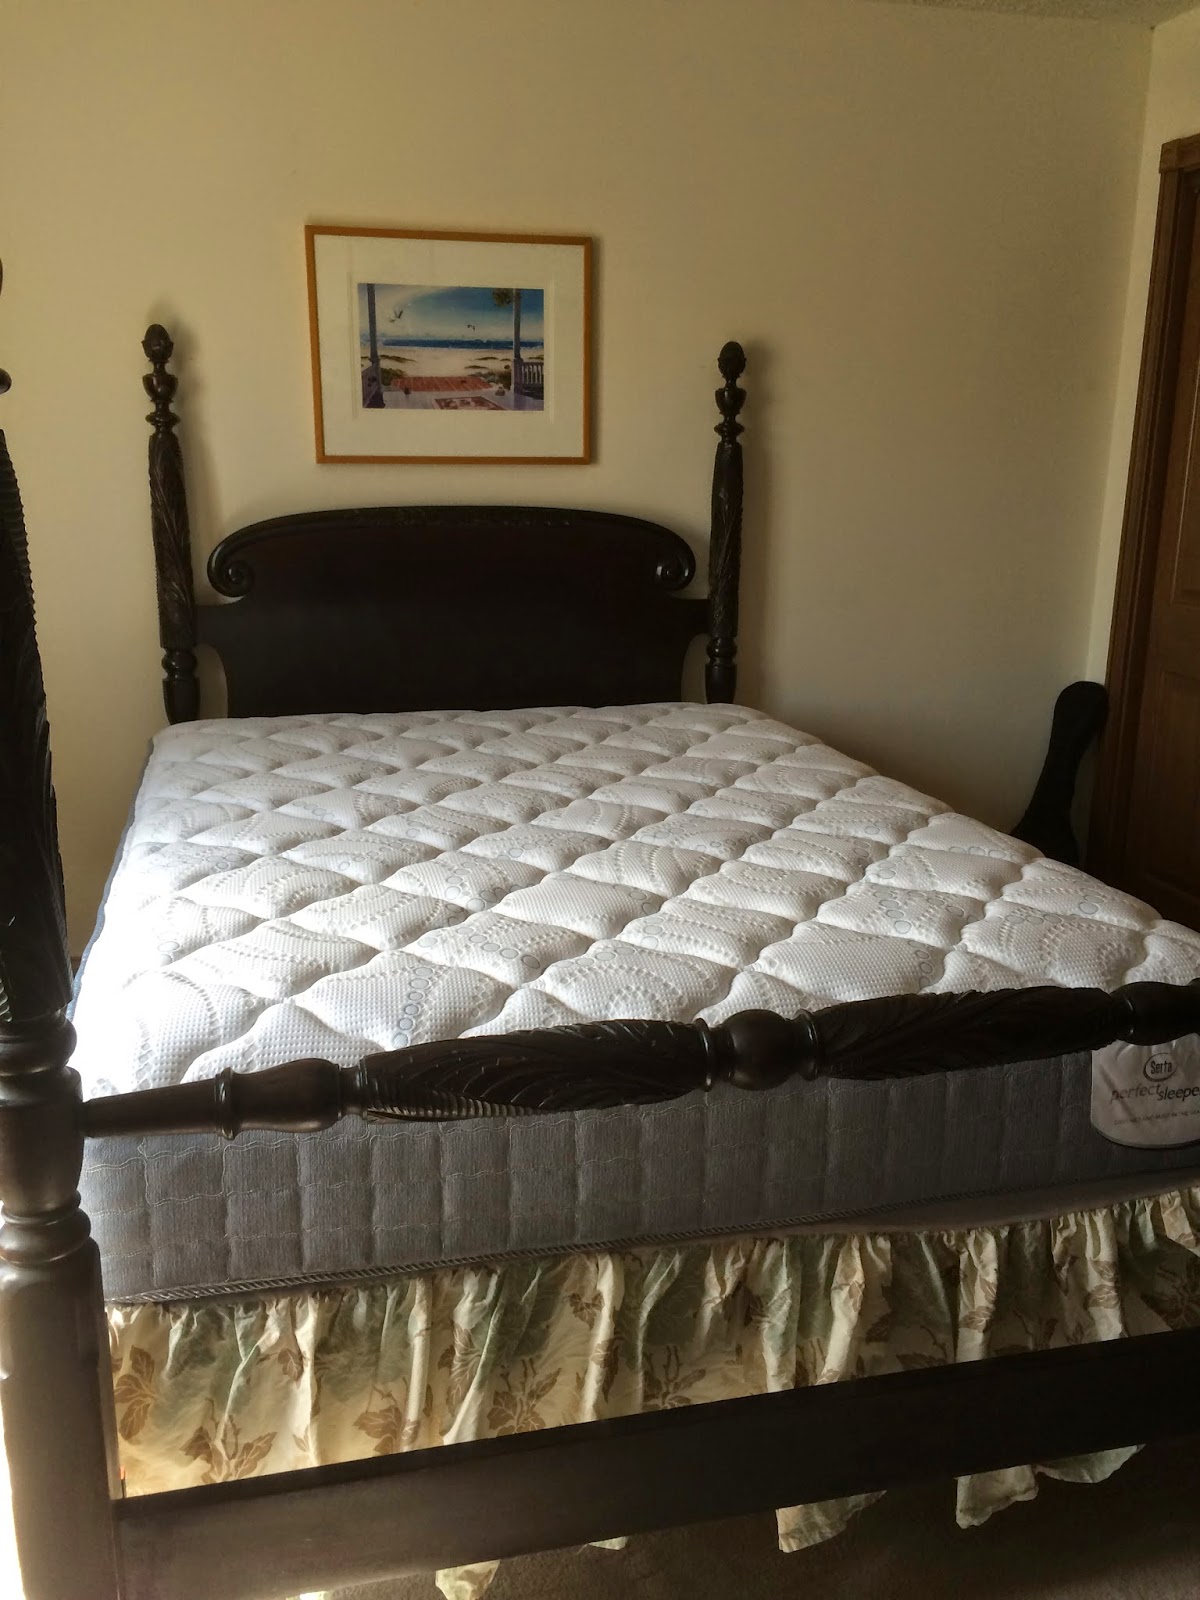 Converting Antique Bed To Queen Mattress, How To Make A Full Bed Into Queen